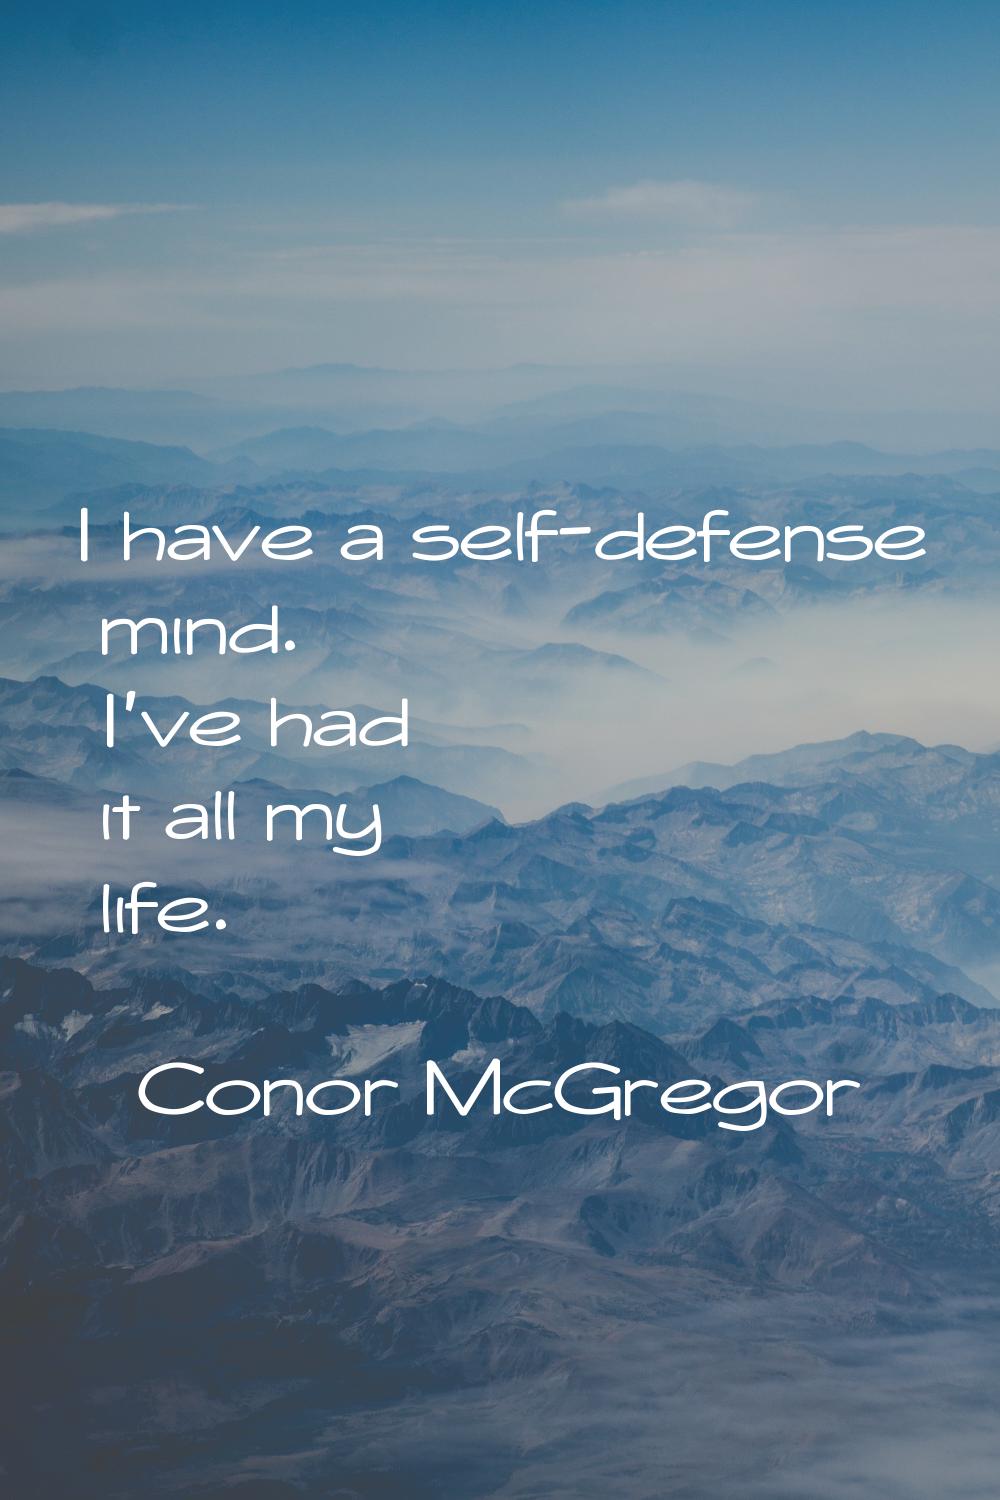 I have a self-defense mind. I've had it all my life.